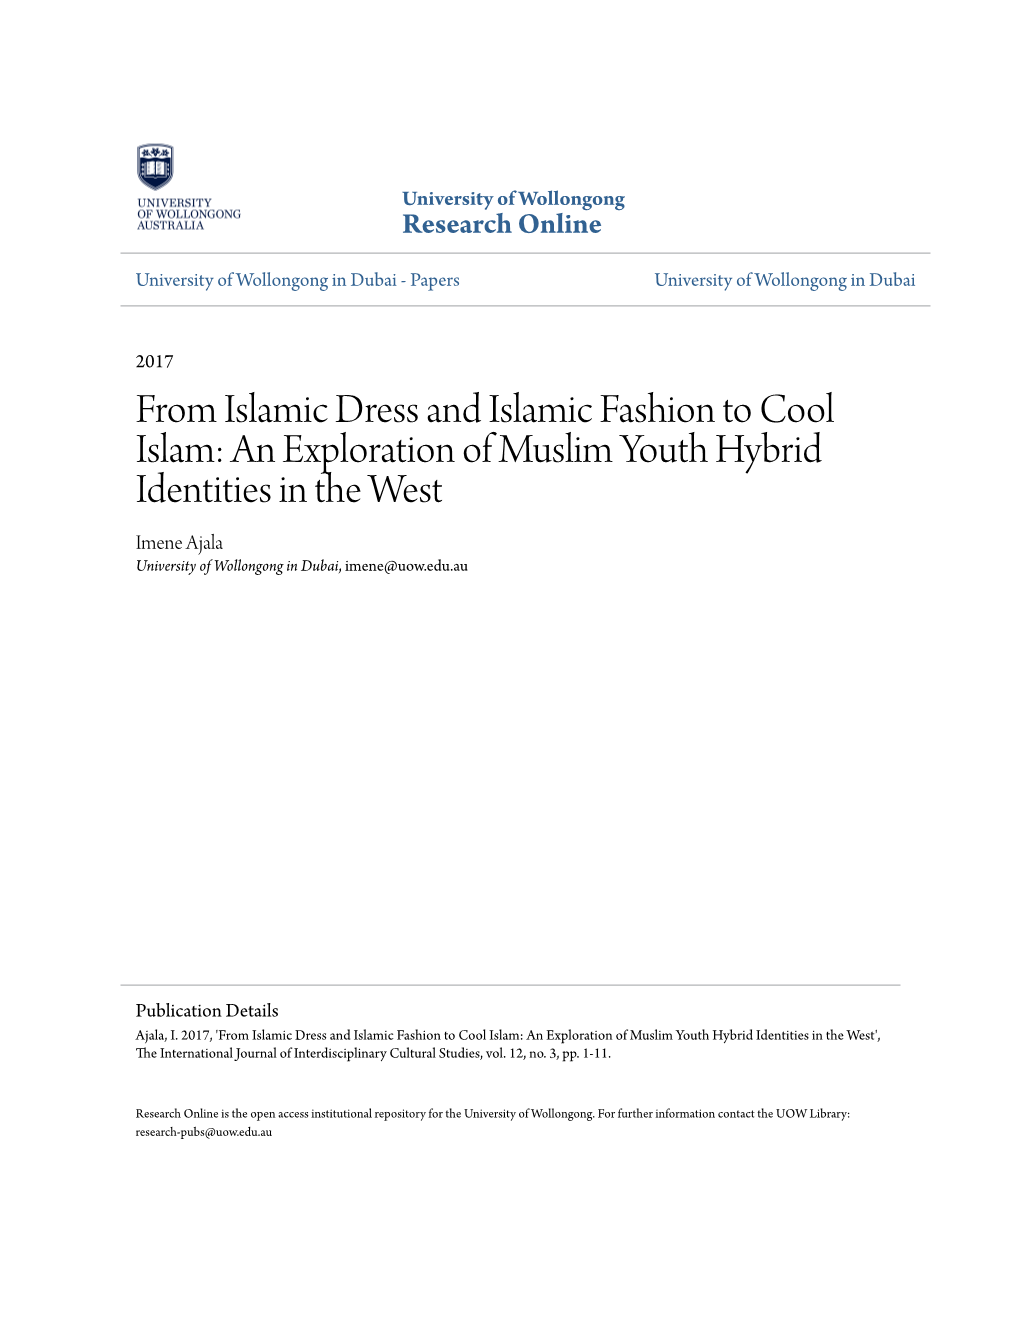 From Islamic Dress and Islamic Fashion to Cool